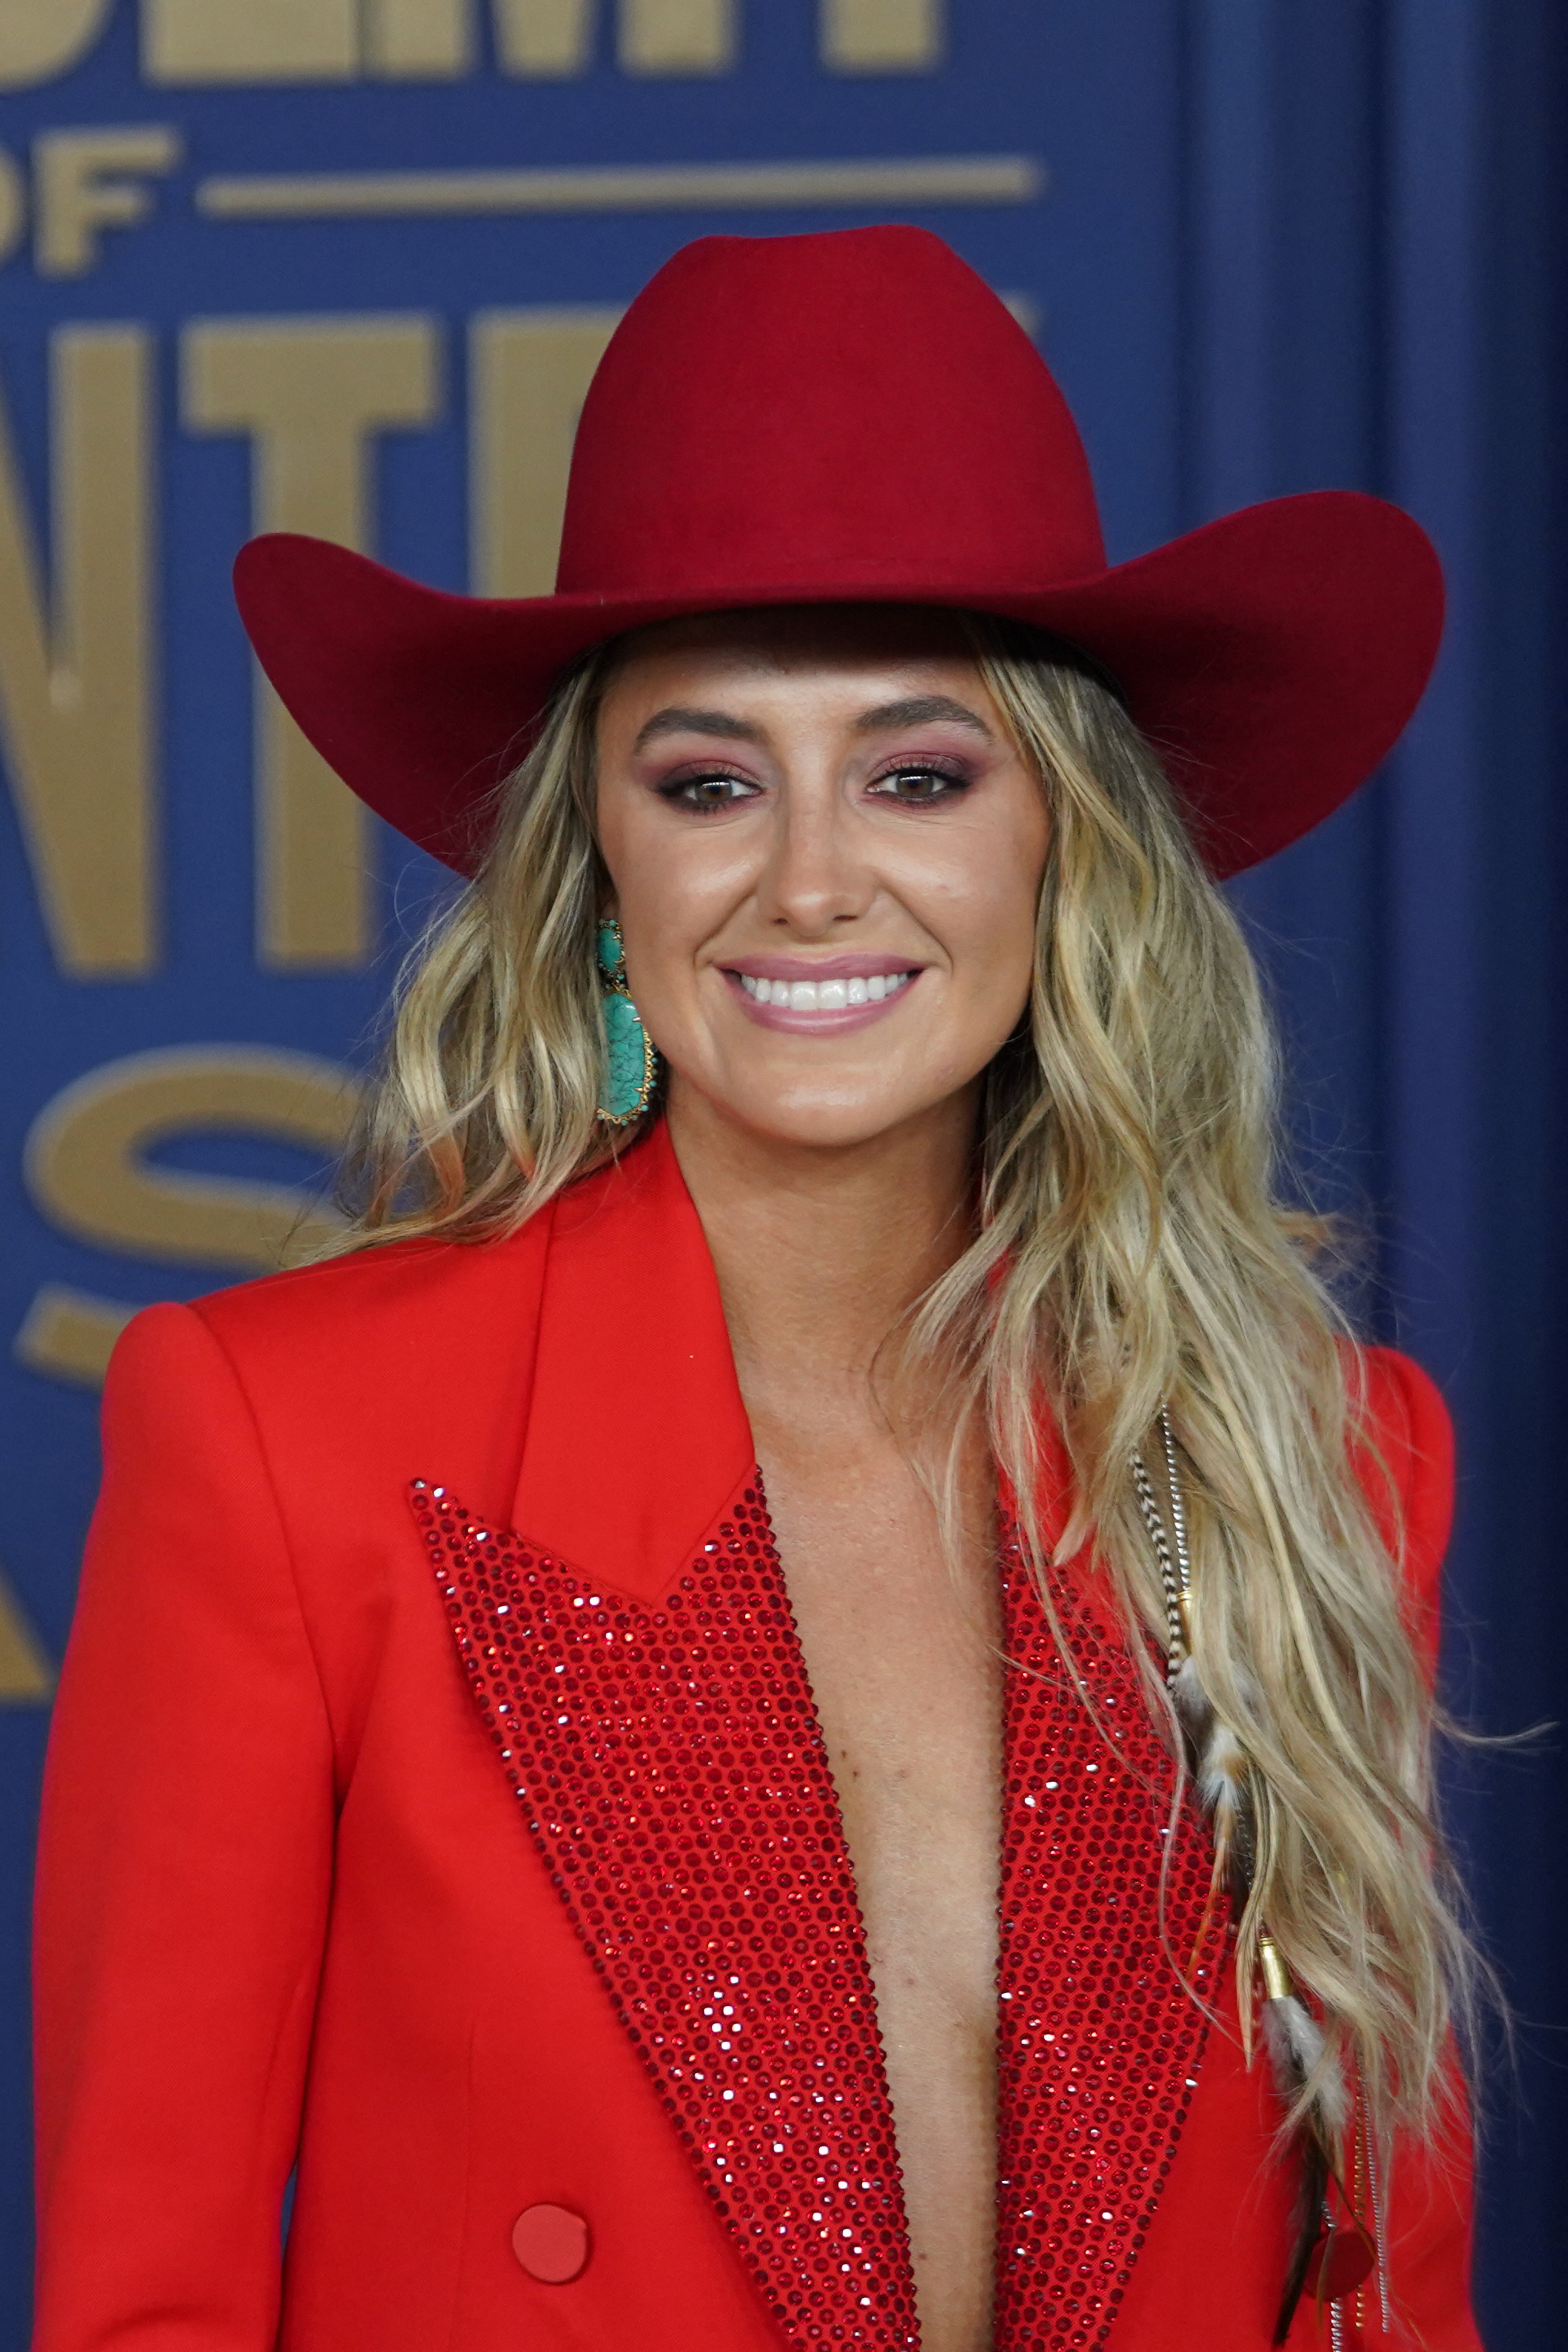 Some fans debunked the Beyonce theory and believed the teaser photo more closely resembled country star Lainey Wilson from behind